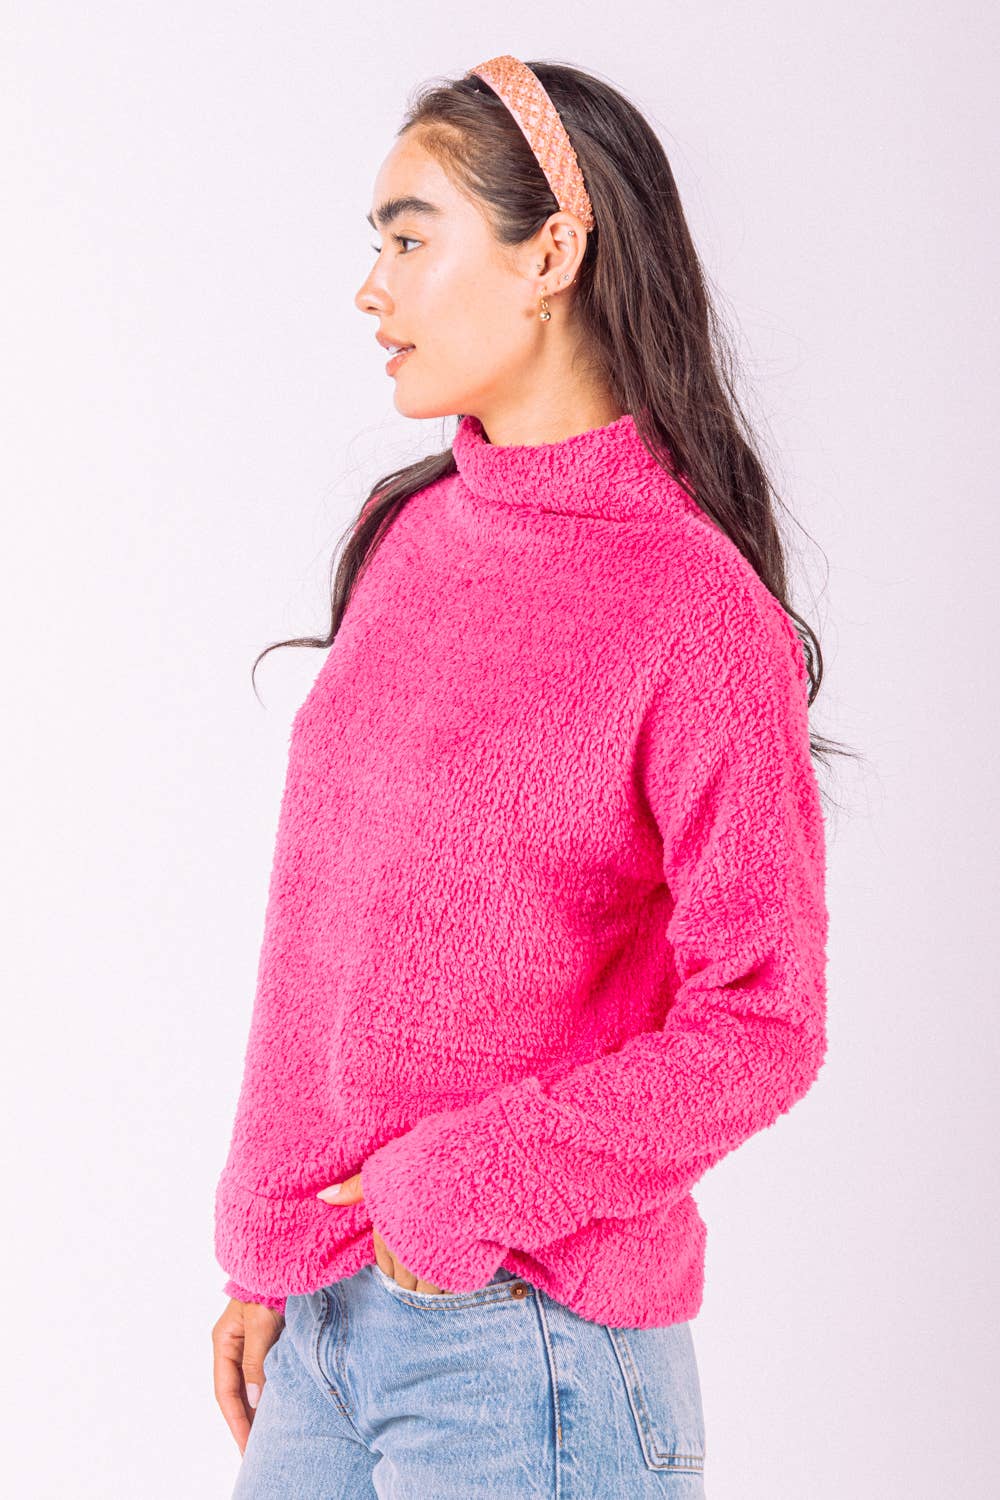 Cozy Mock Neck Pullover - Milly's Boutique